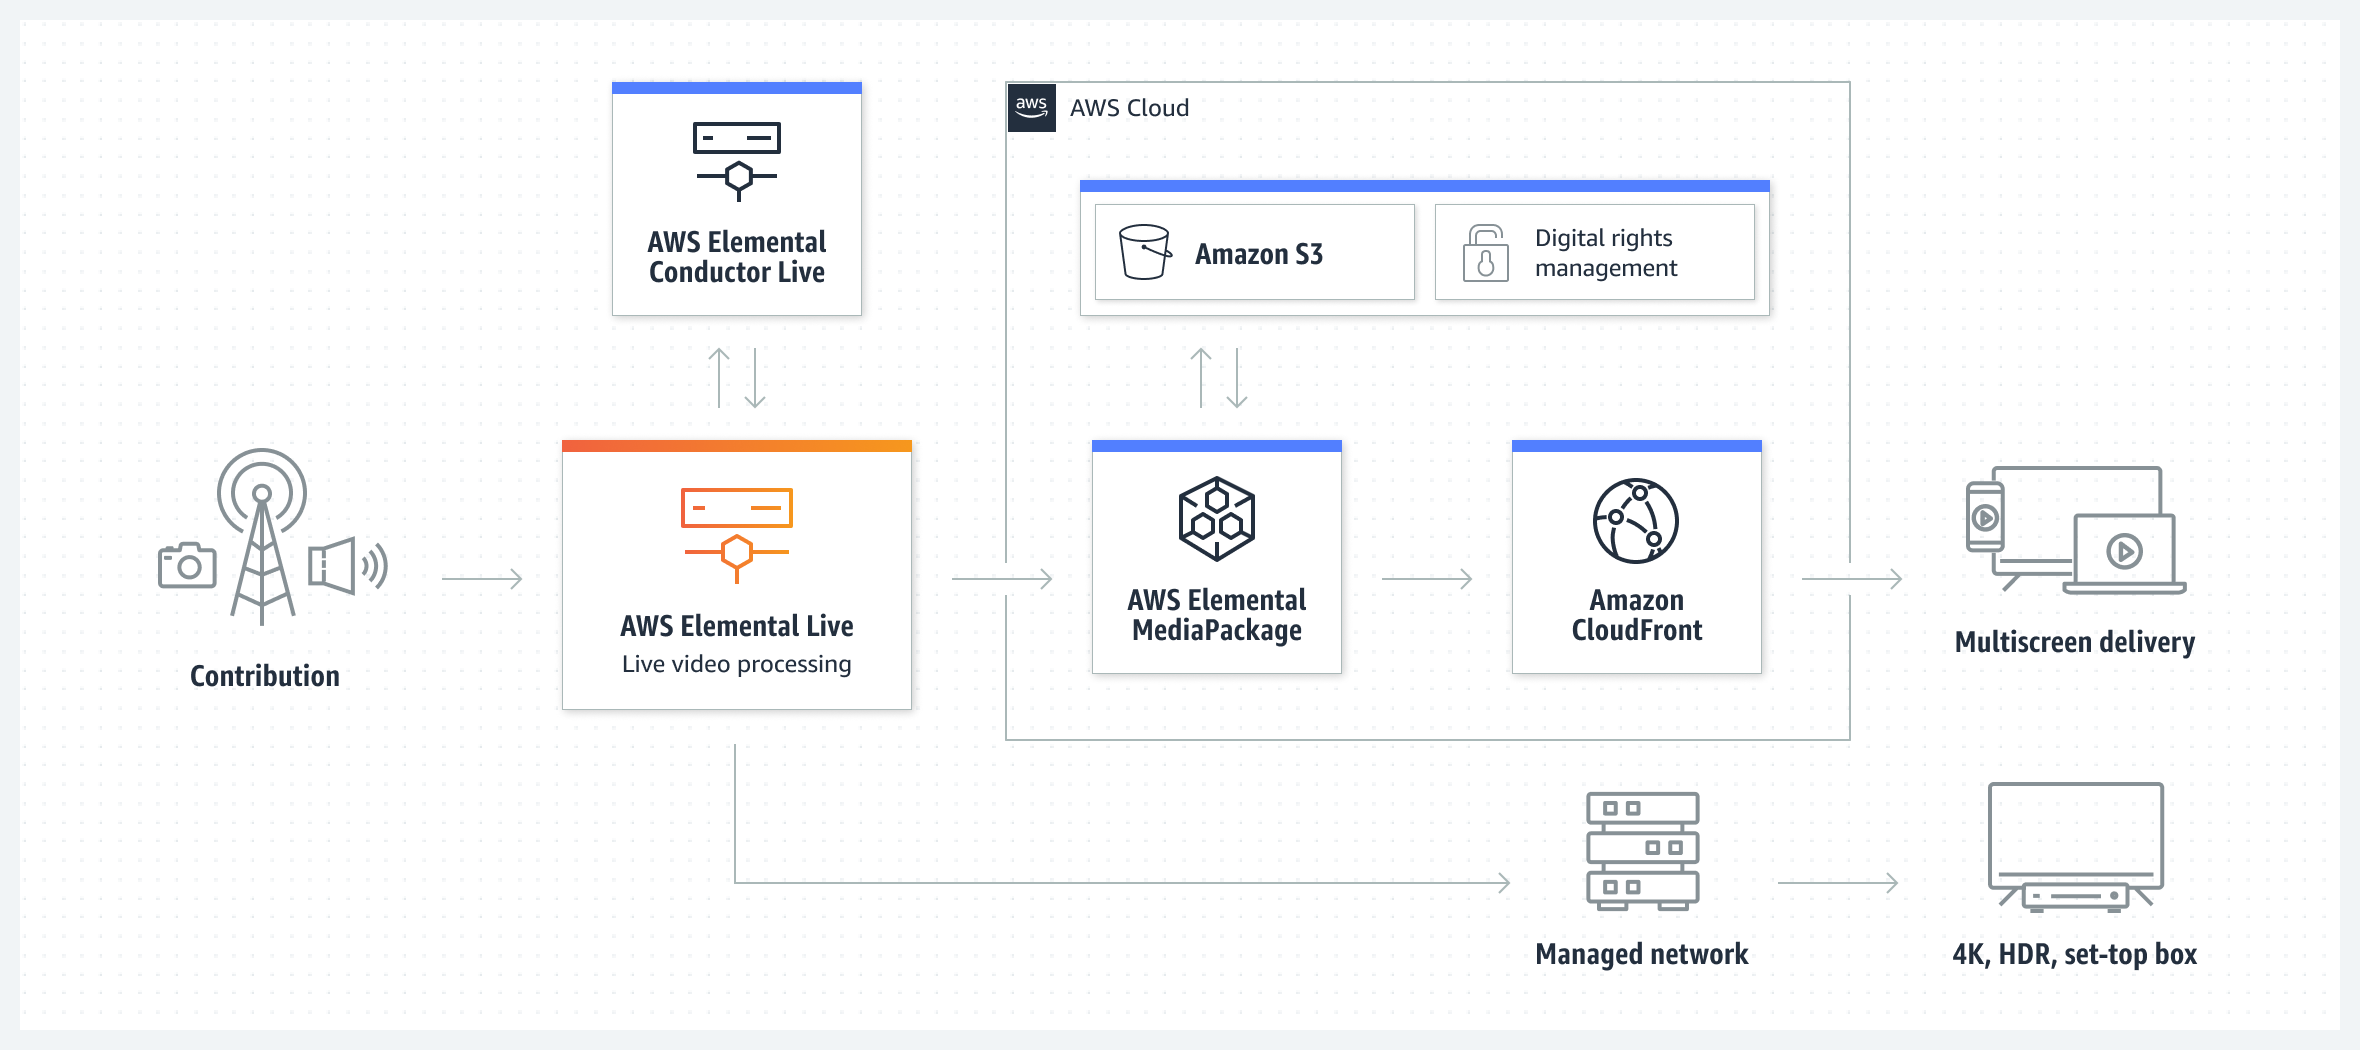 Diagram showing how AWS Elemental Live connects to related AWS media services to deliver video to users.